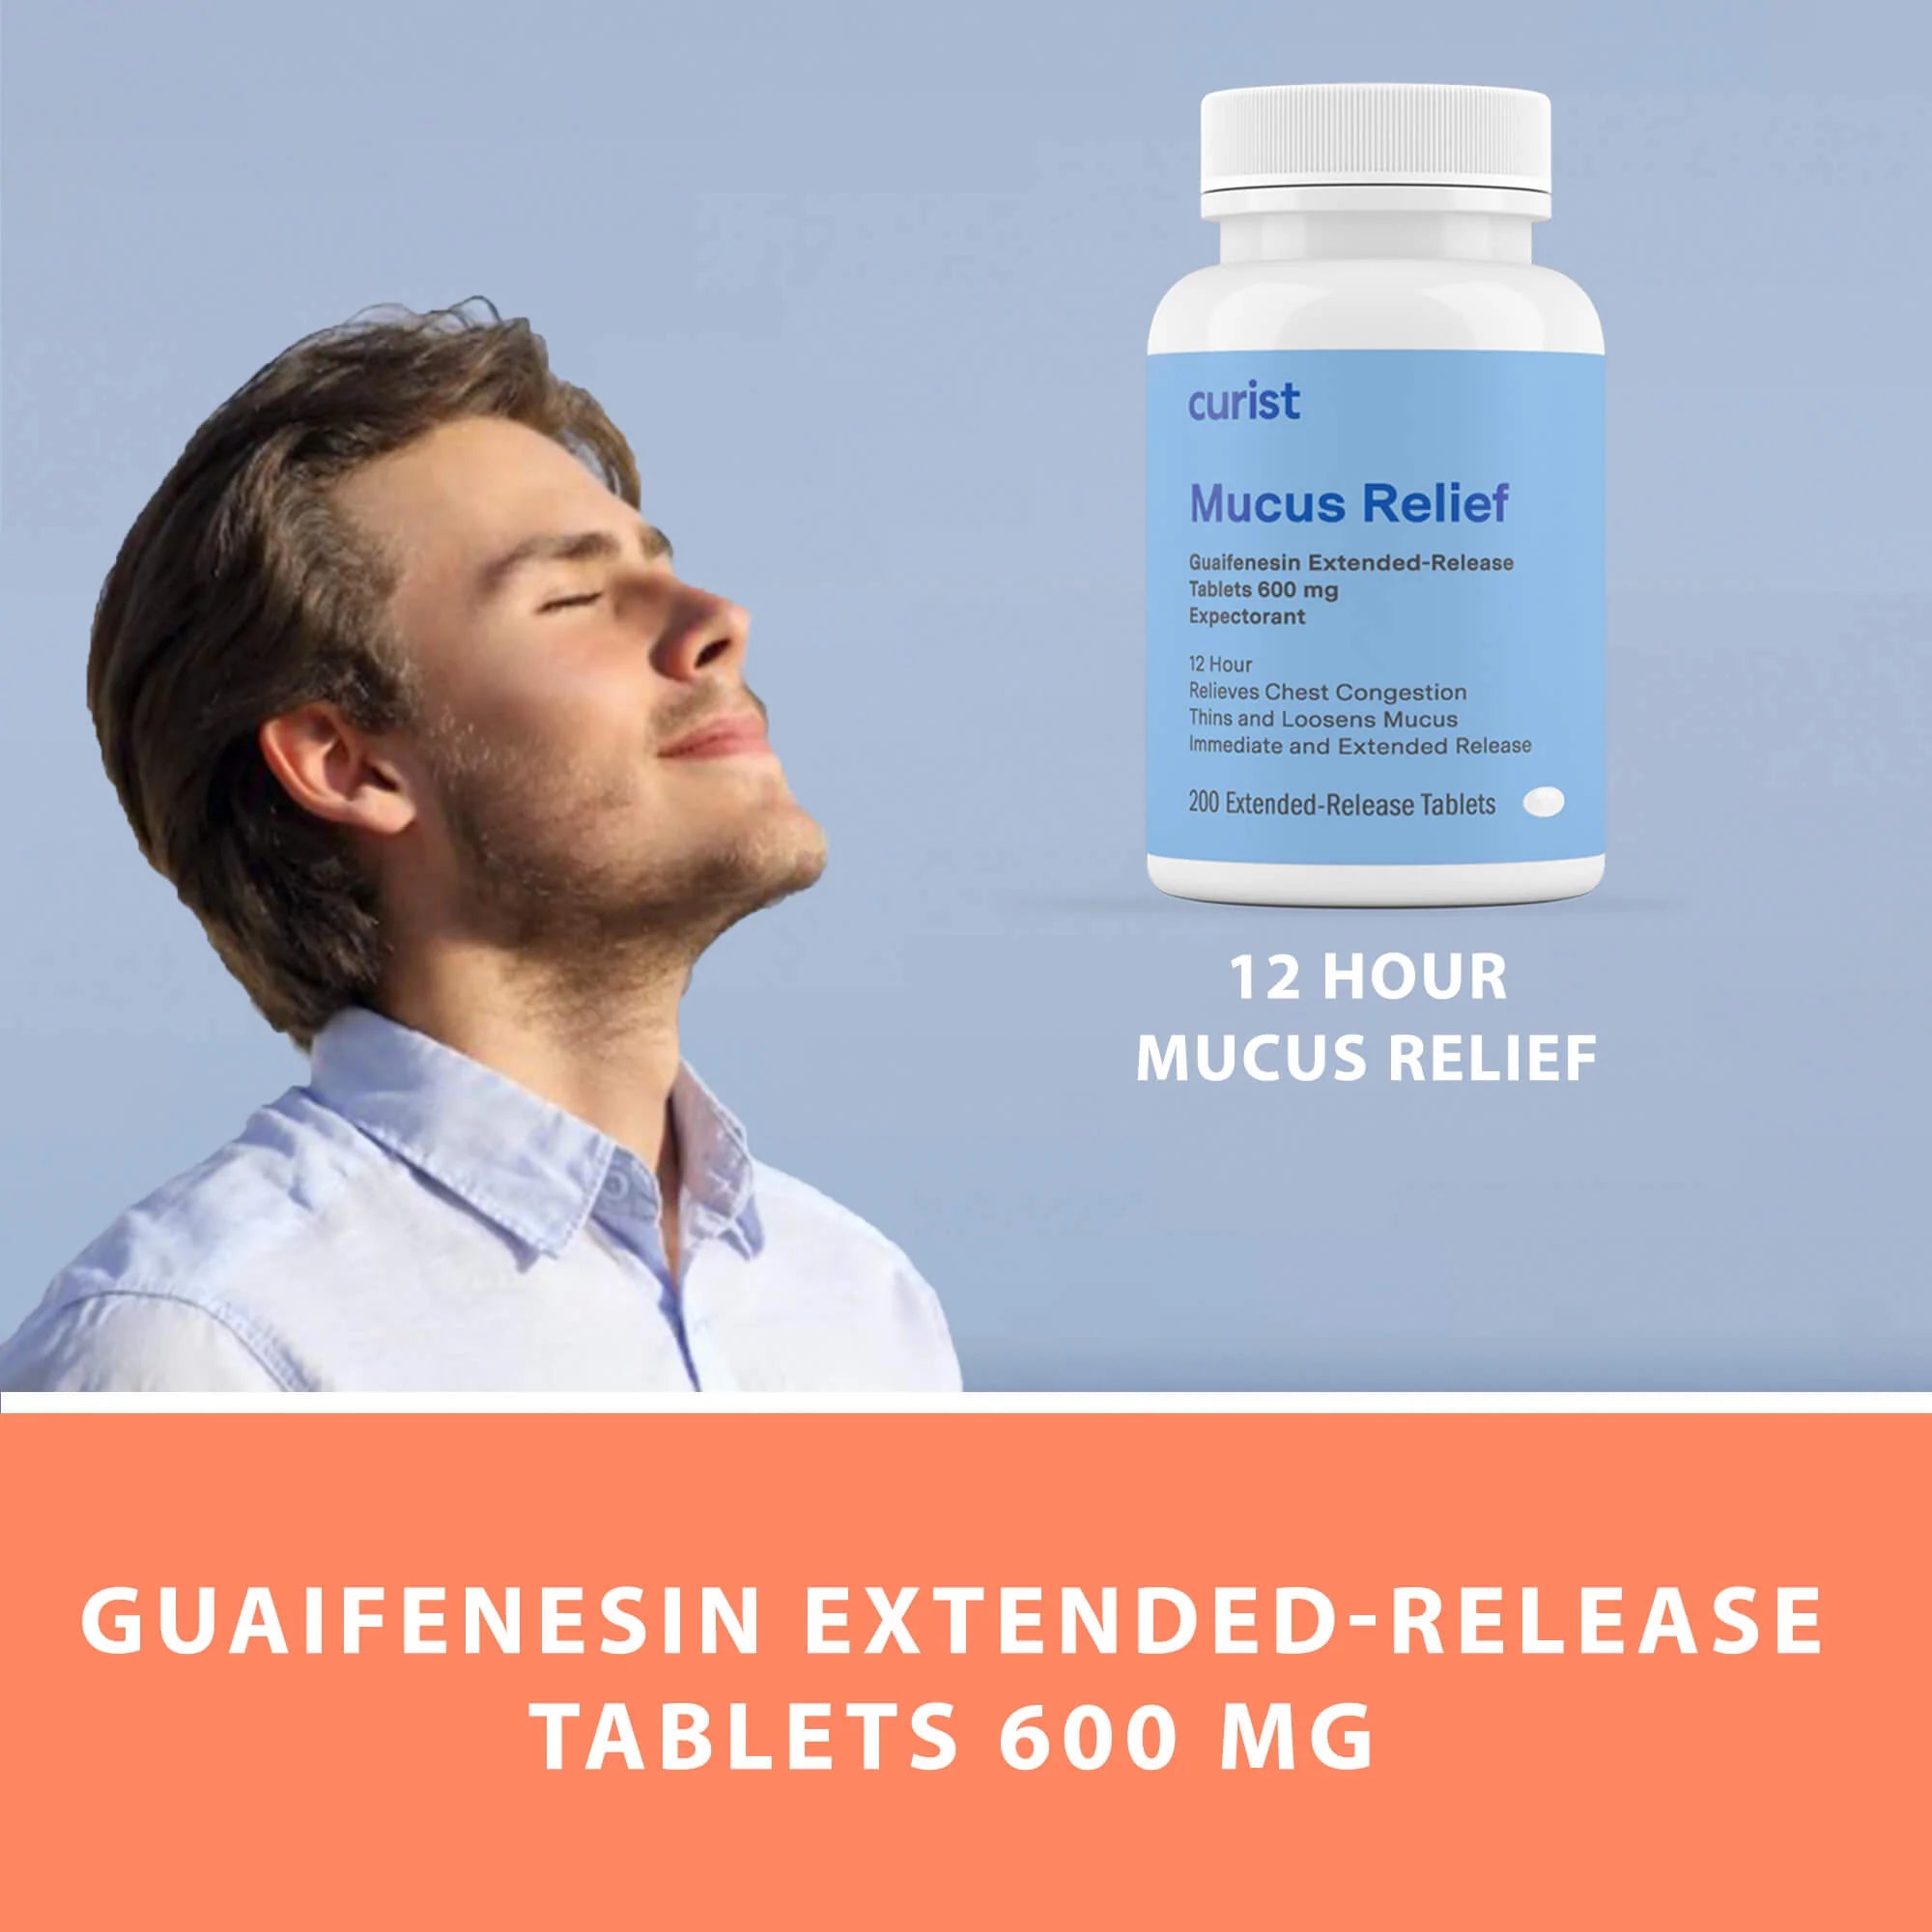  Mucus Relief (guaifenesin 600 mg), 200 Ct by Curist Curist Perfumarie